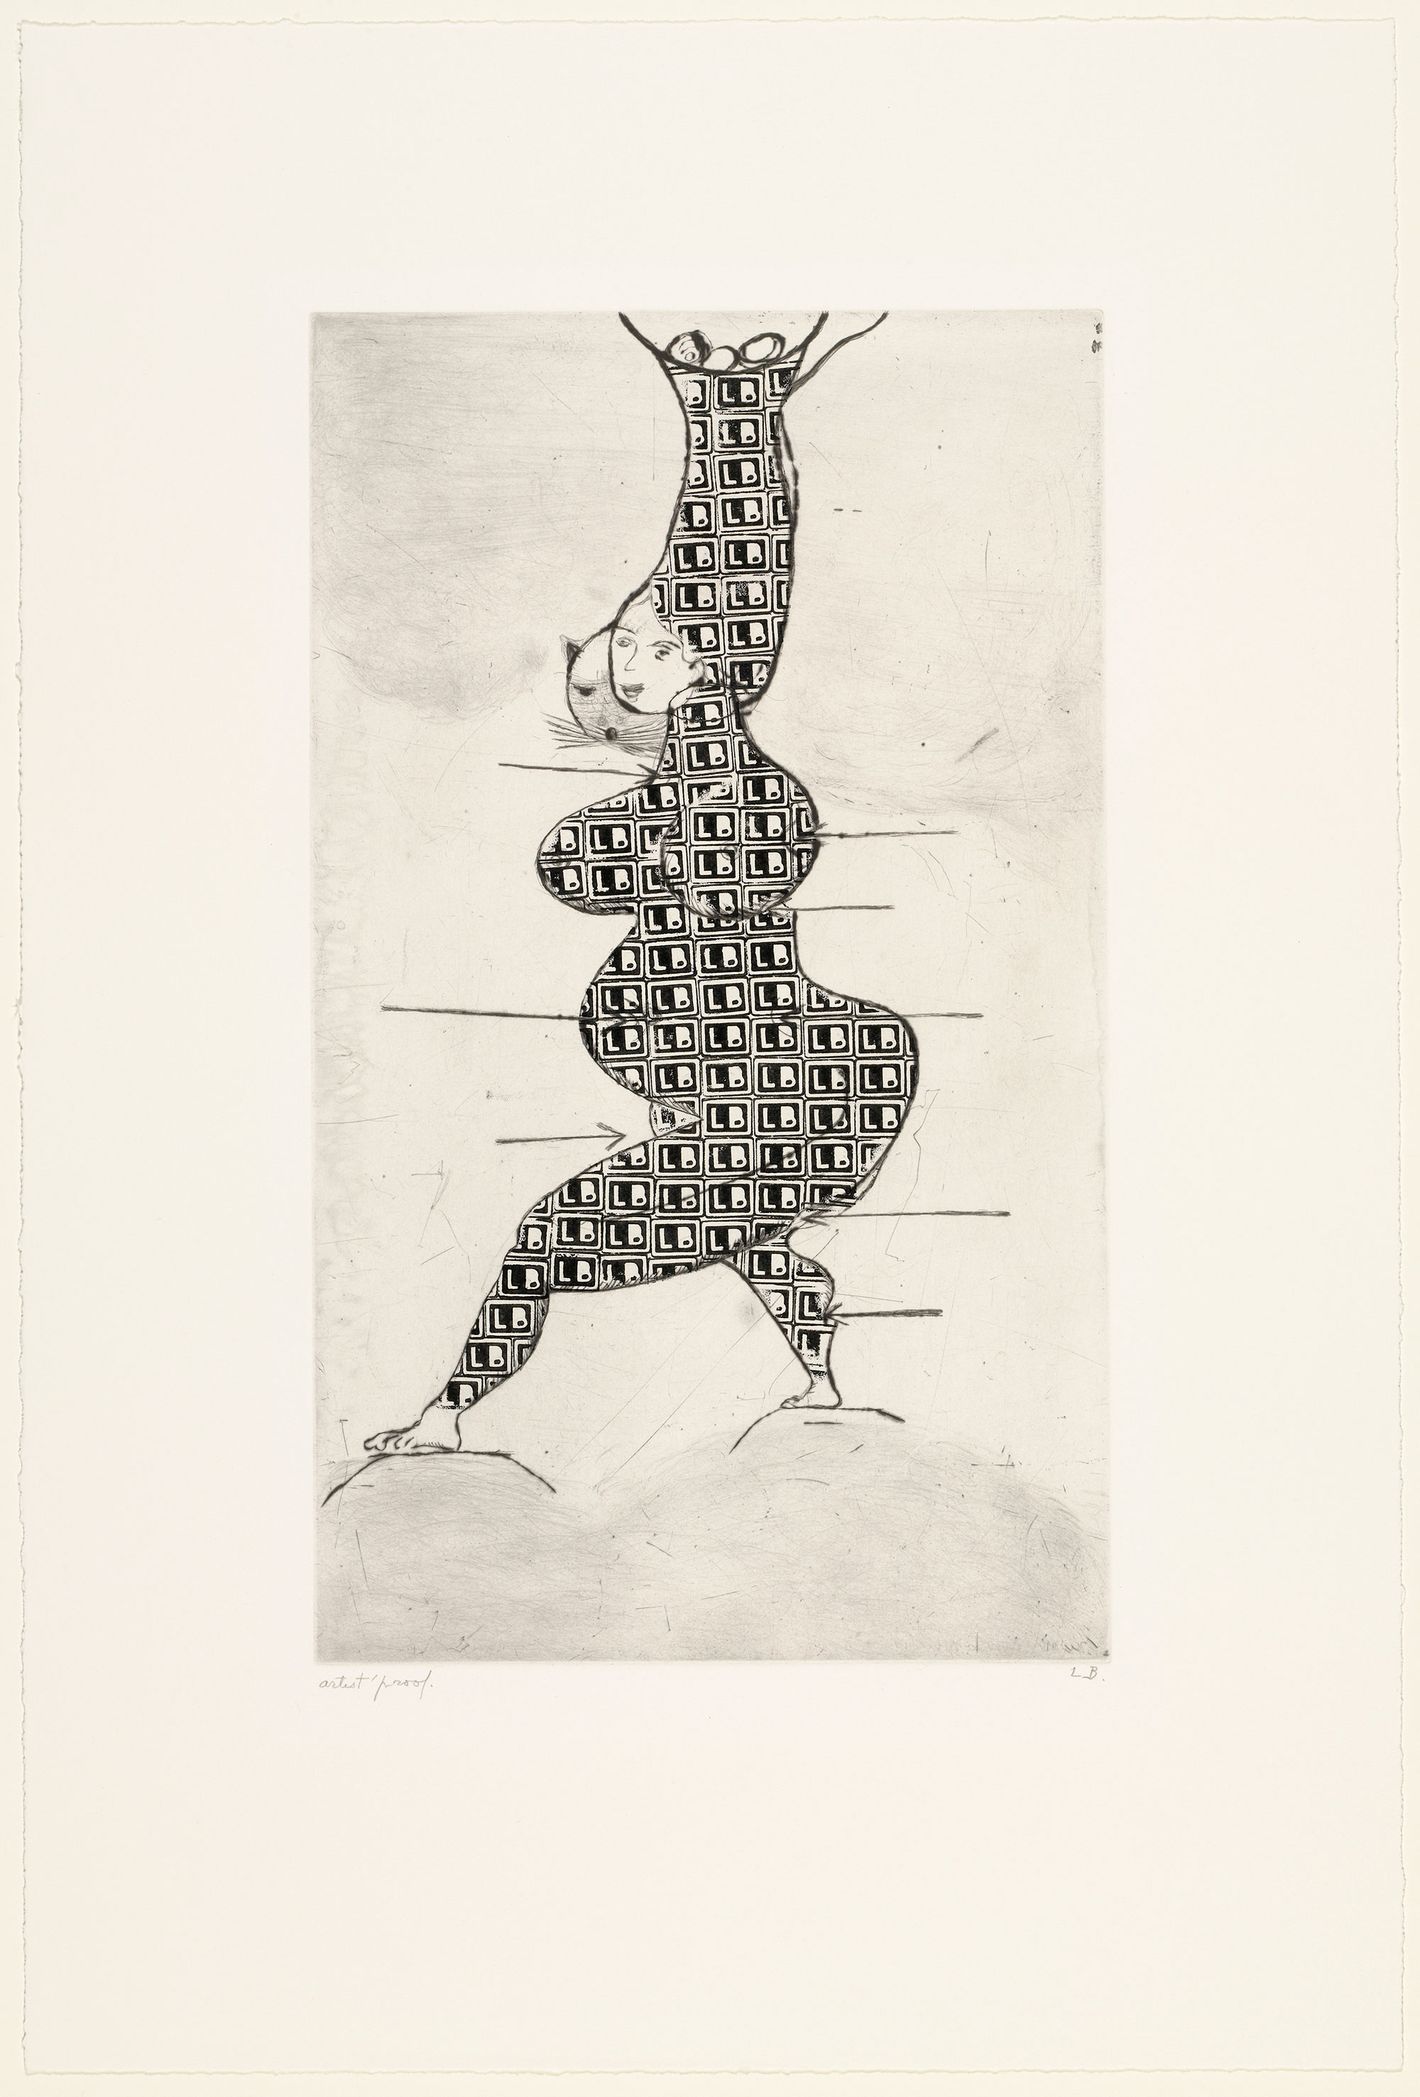 Louise Bourgeois: Imagination Unfolds in All Dimensions - The New